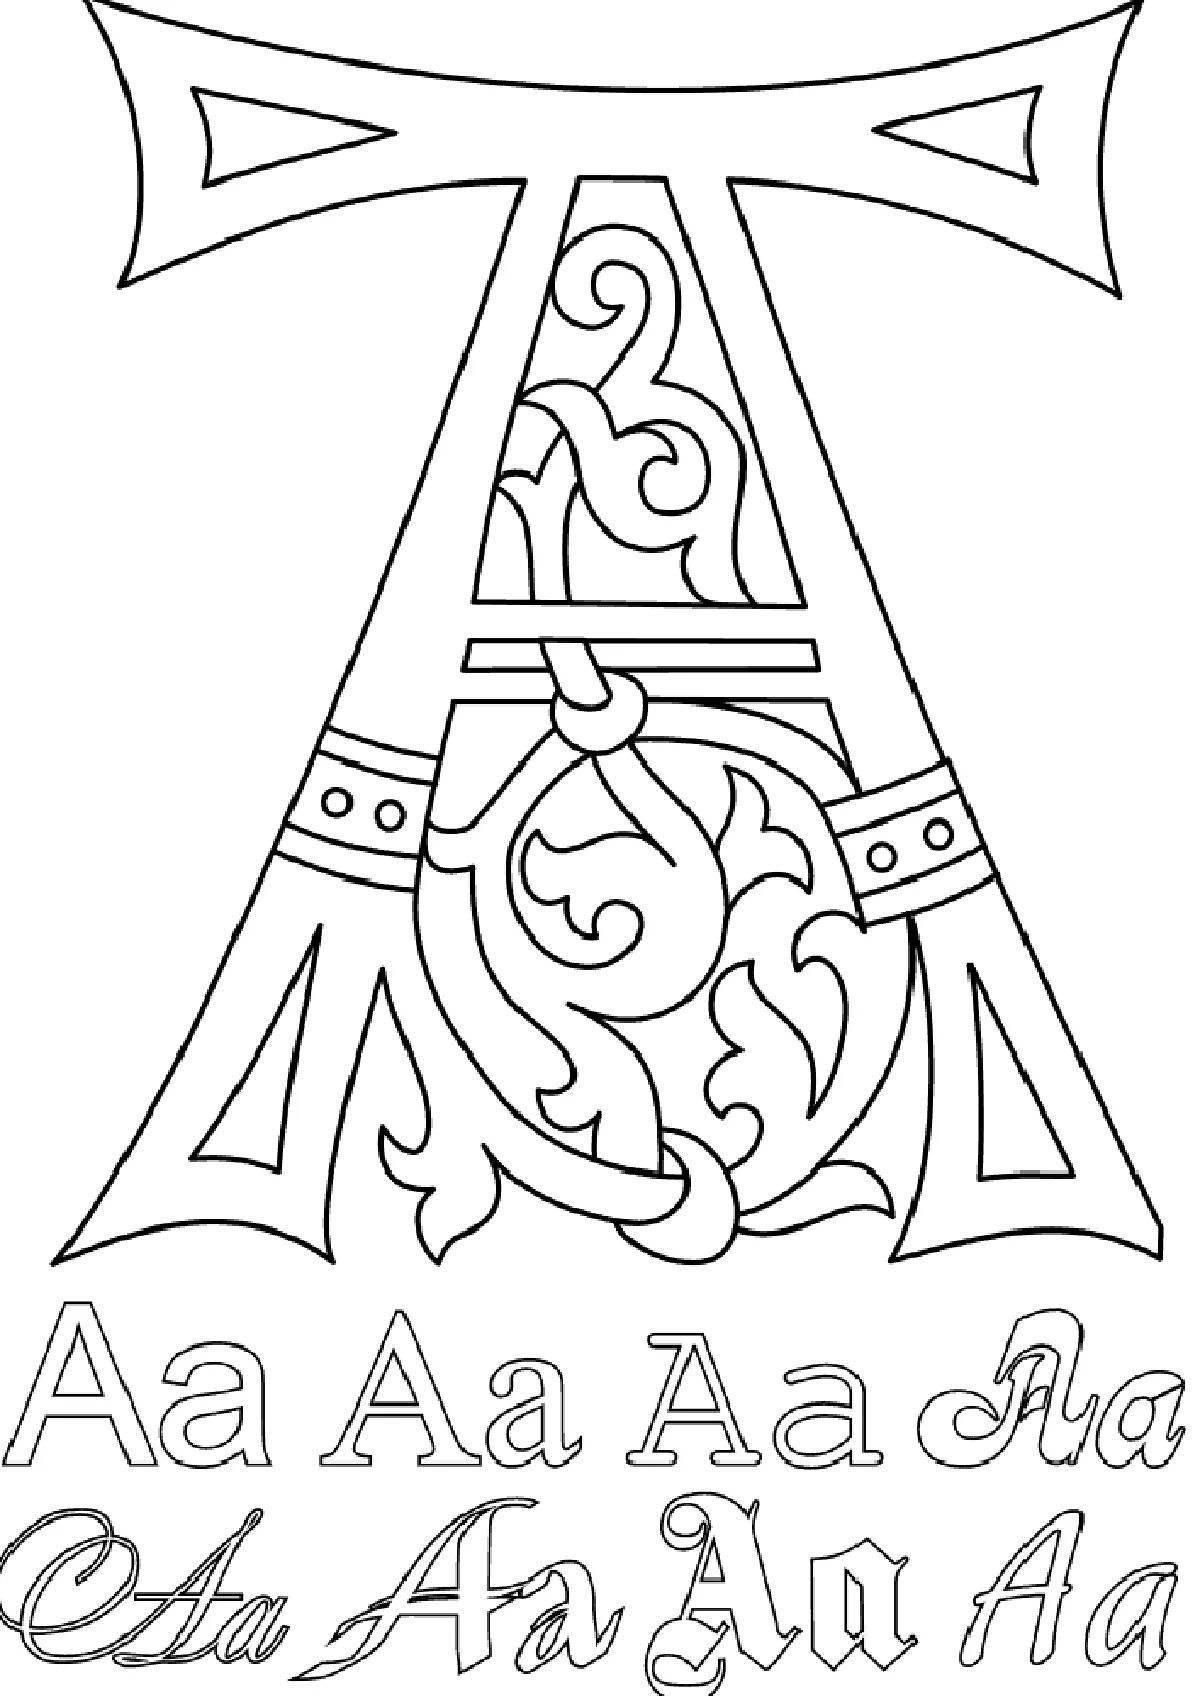 Colourful letters coloring pages with letters for kids